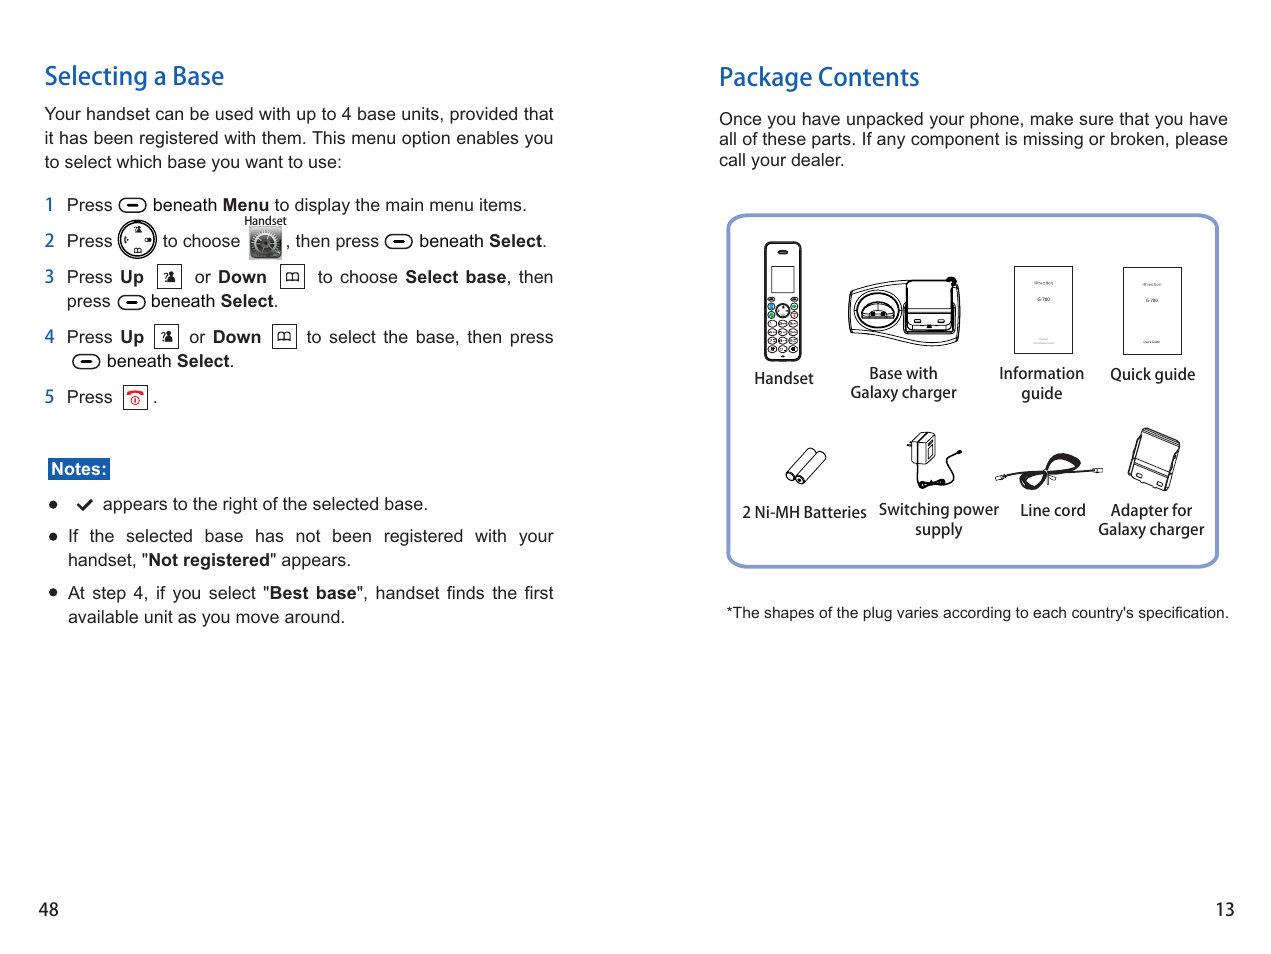 Package contents, Selecting a base | iCreation G-700 user vanual User Manual | Page 14 / 62